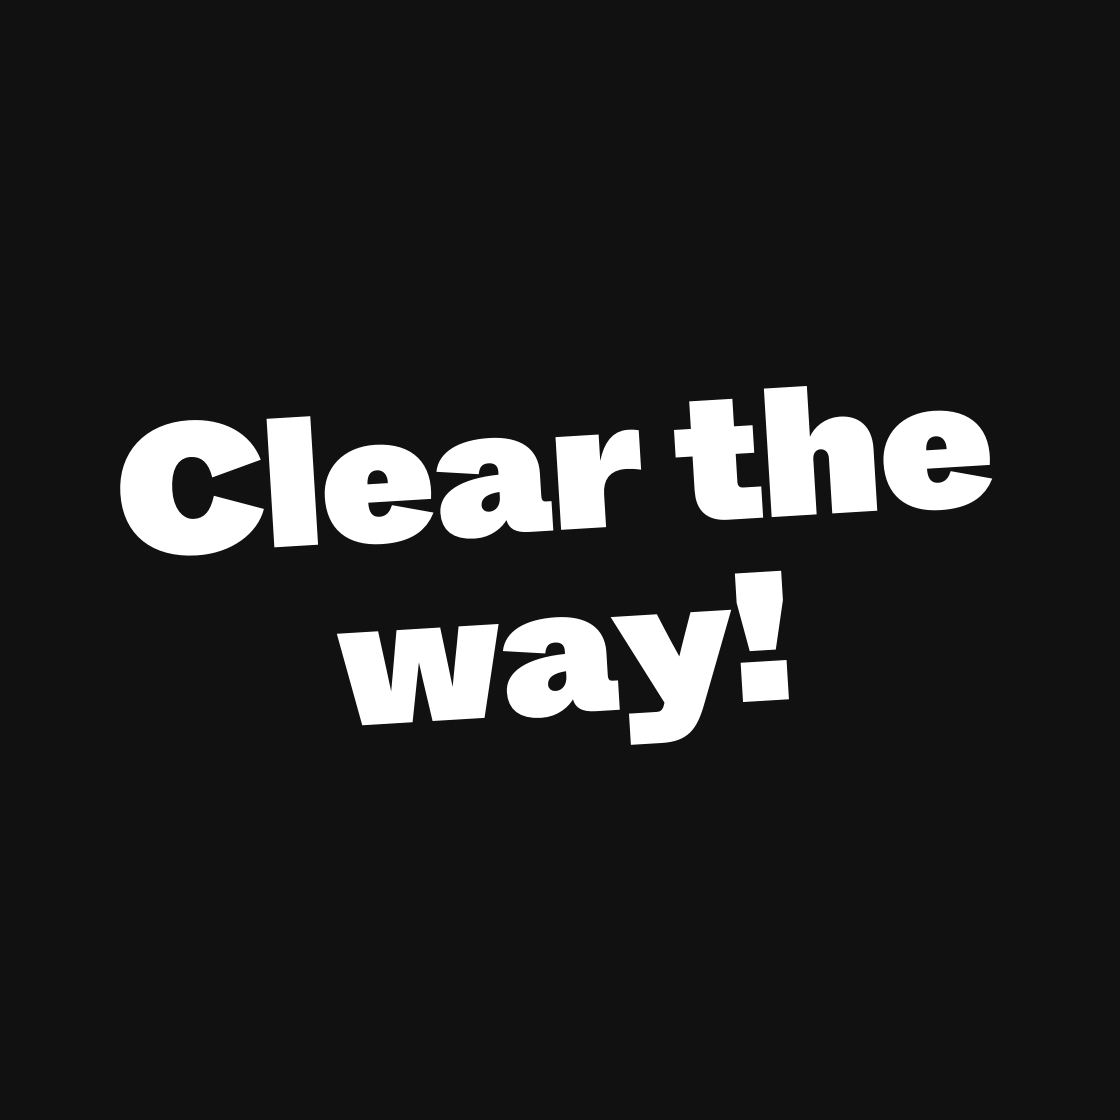 Clear the way!